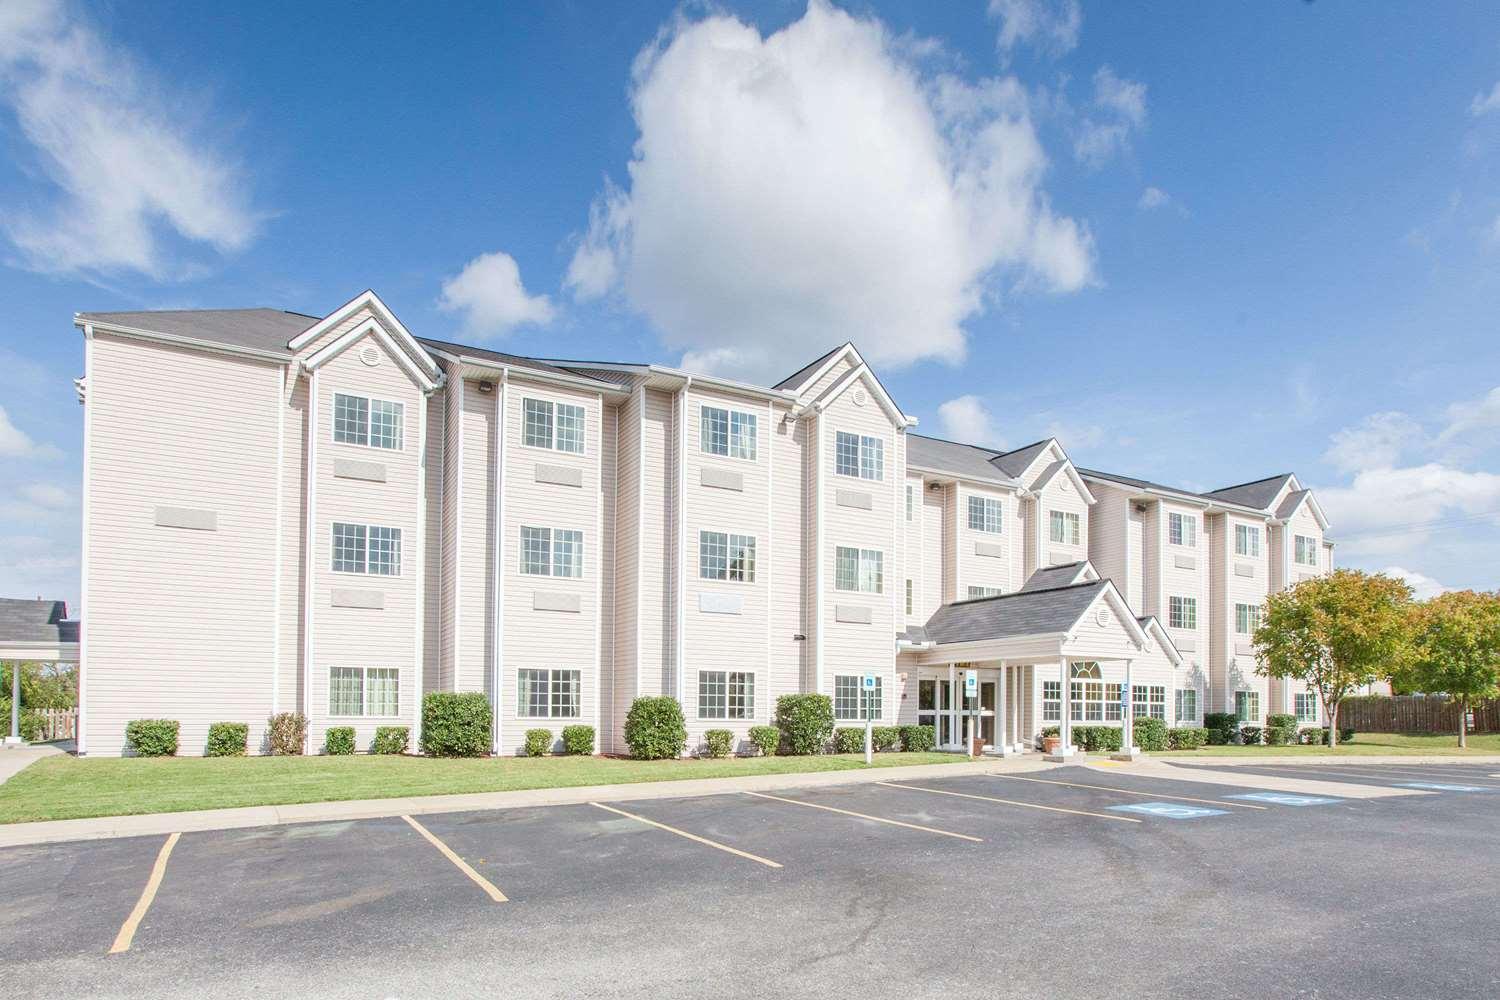 Microtel Inn & Suites by Wyndham Rogers in Rogers, AR